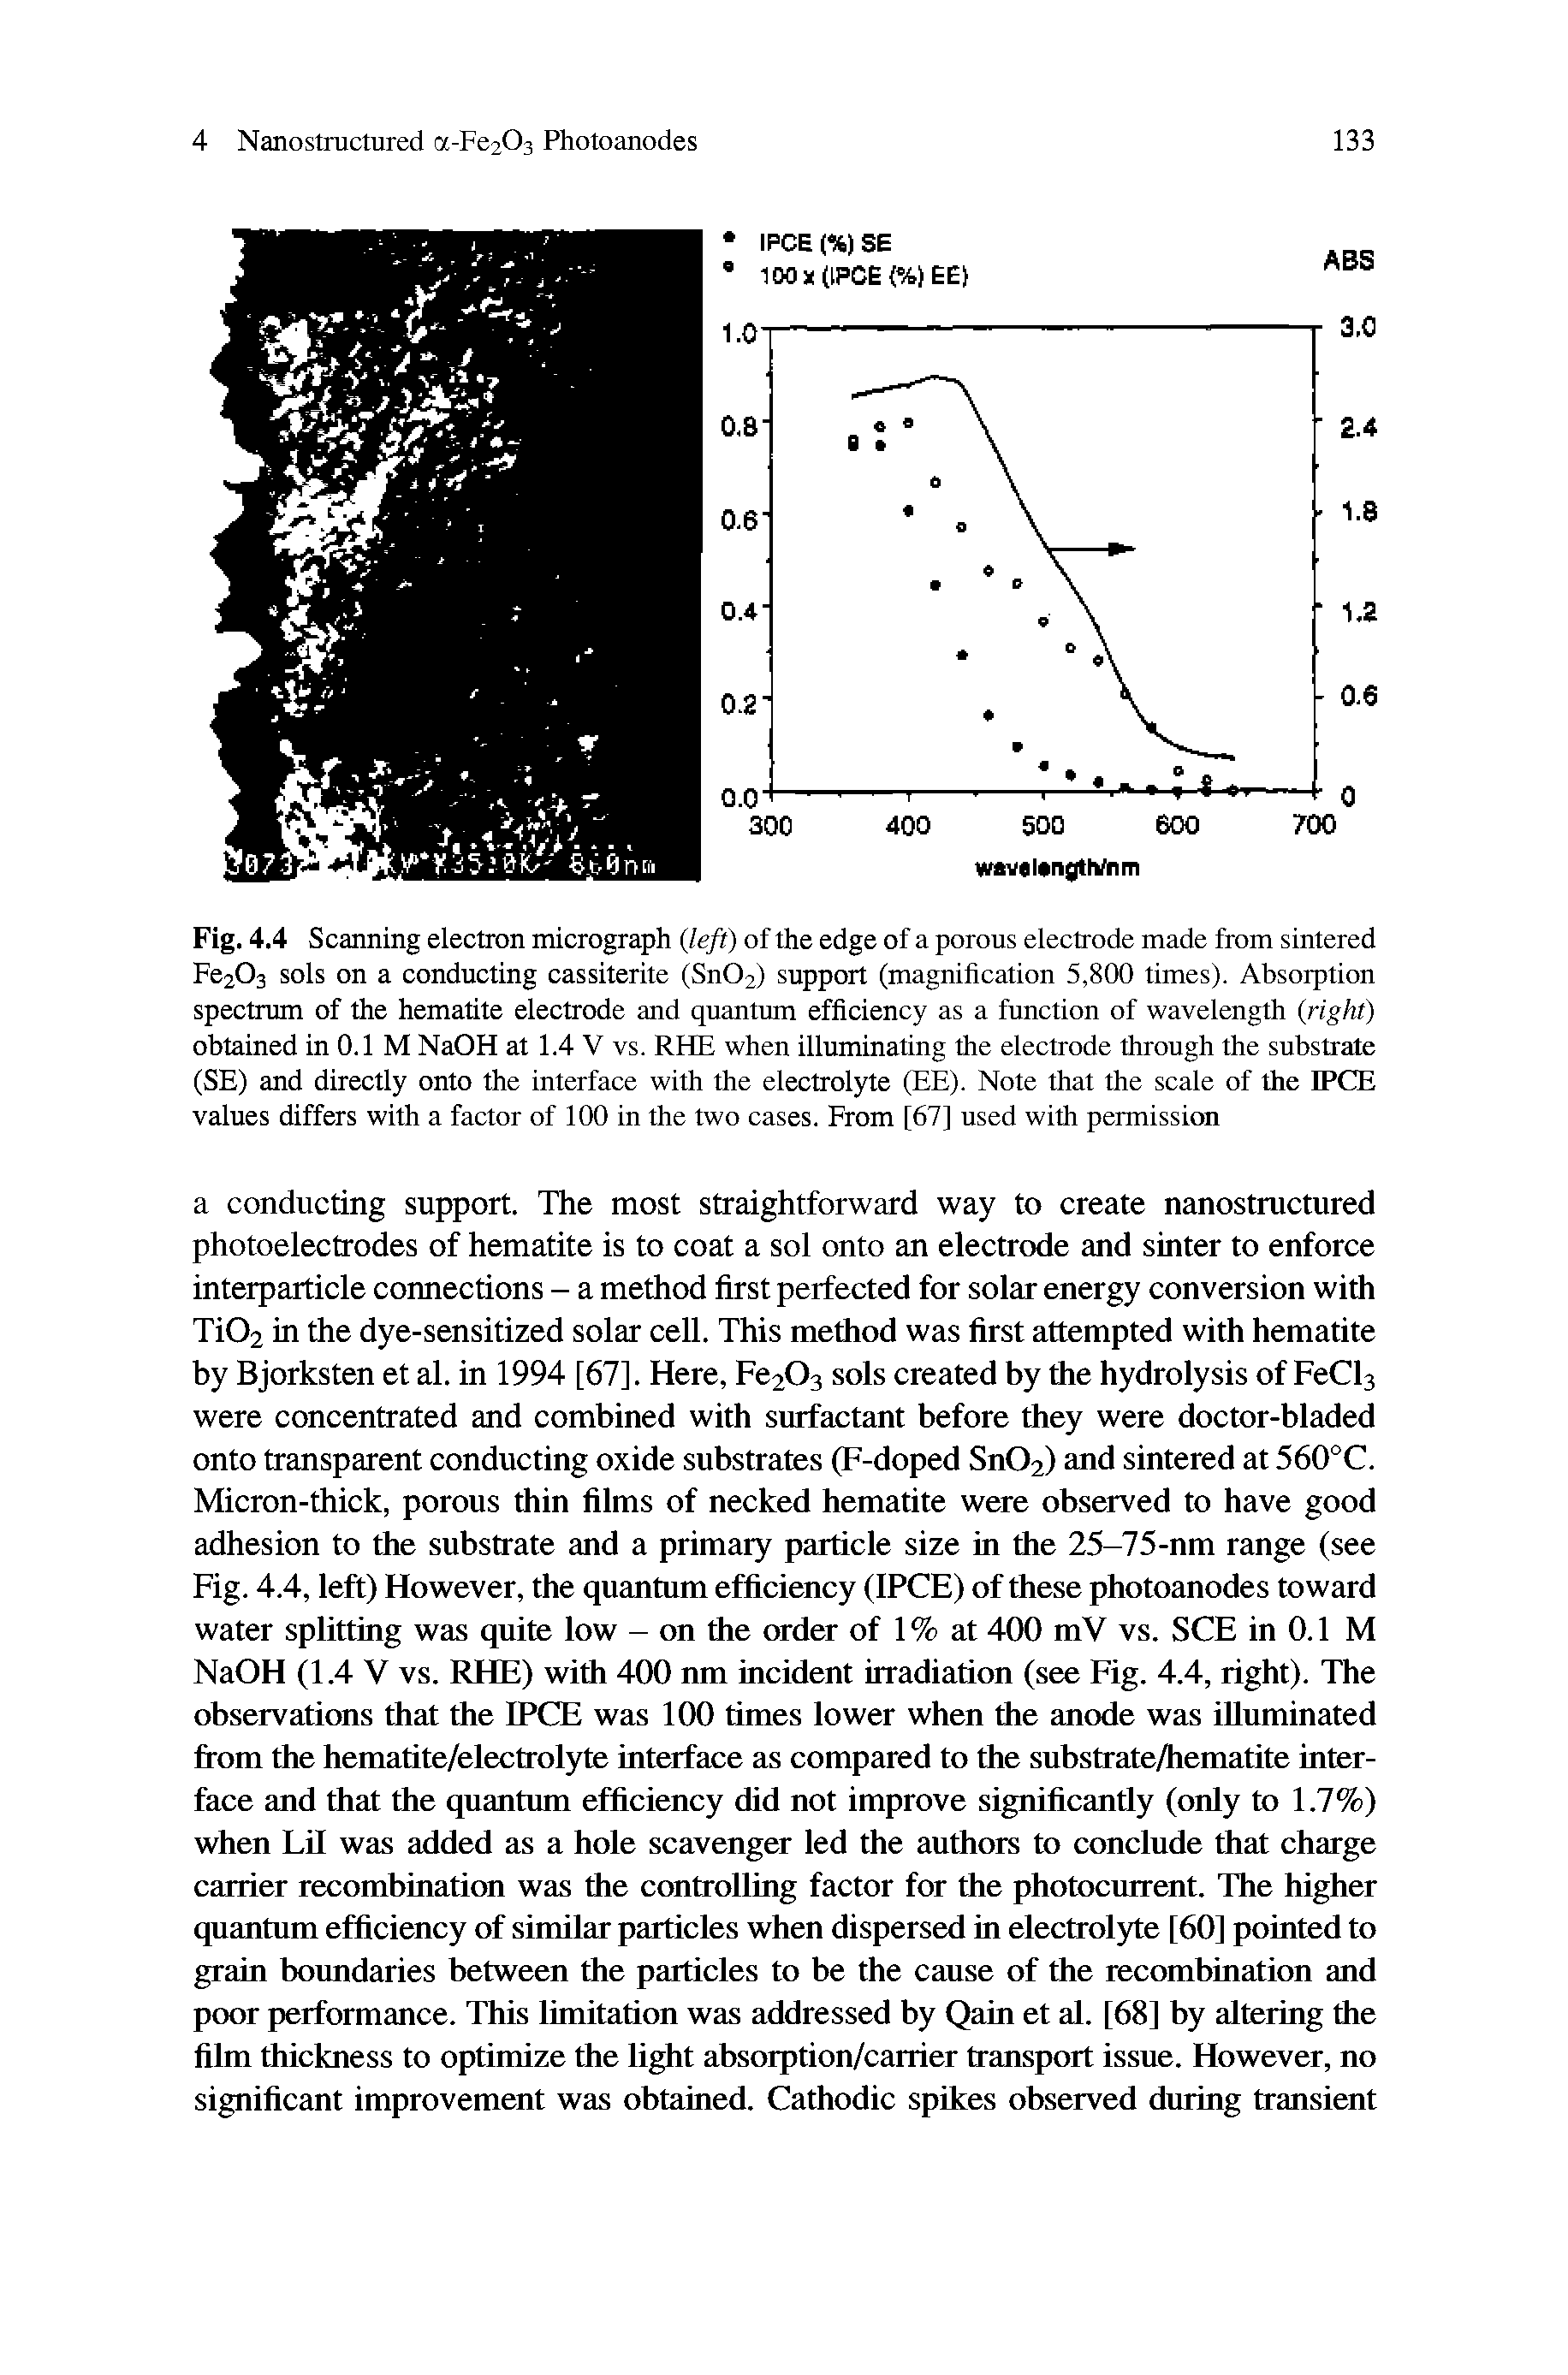 Fig. 4.4 Scanning electron micrograph (left) of the edge of a porous electrode made from sintered Fc203 sols on a conducting cassiterite (Sn02) support (magnification 5,800 times). Absorption spectrum of the hematite electrode and quantum efficiency as a function of wavelength (right) obtained in 0.1 M NaOH at 1.4 V vs. RHE when illuminating the electrode through the substrate (SE) and directly onto the interface with the electrolyte (EE). Note that the scale of the IPCE values differs with a factor of 100 in the two cases. From [67] used with permission...